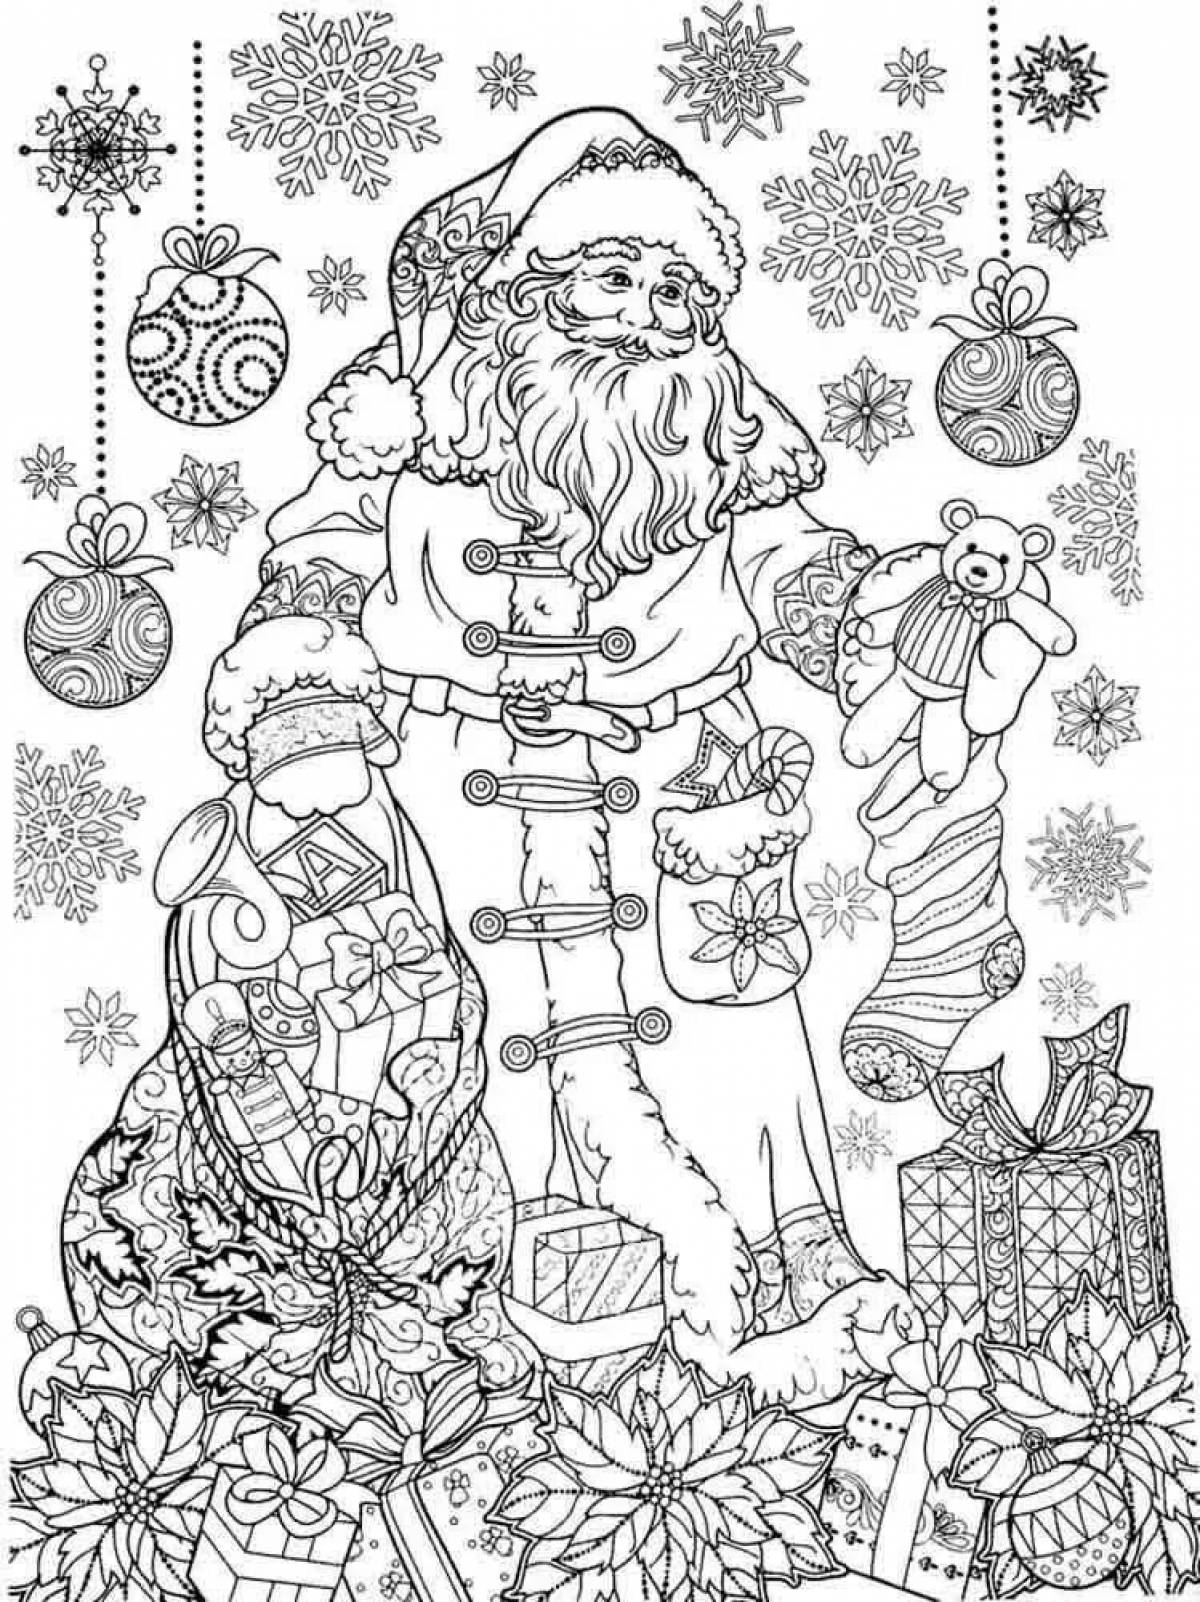 Colorful New Year antistress coloring book